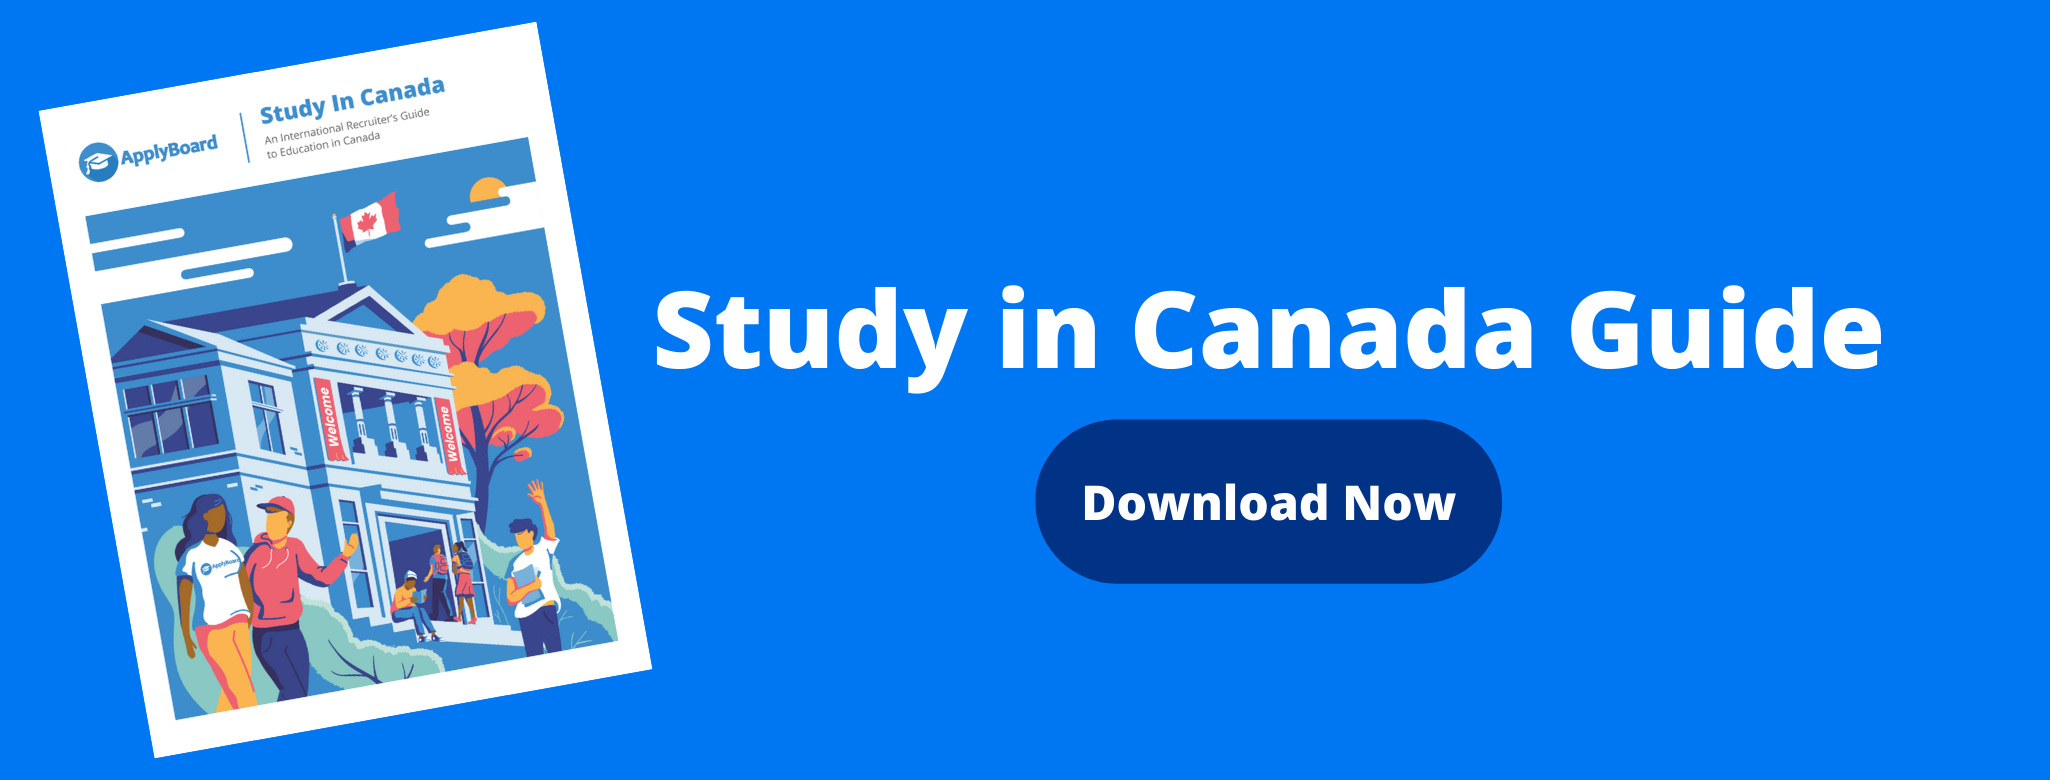 Study in Canada Guide - Download Now